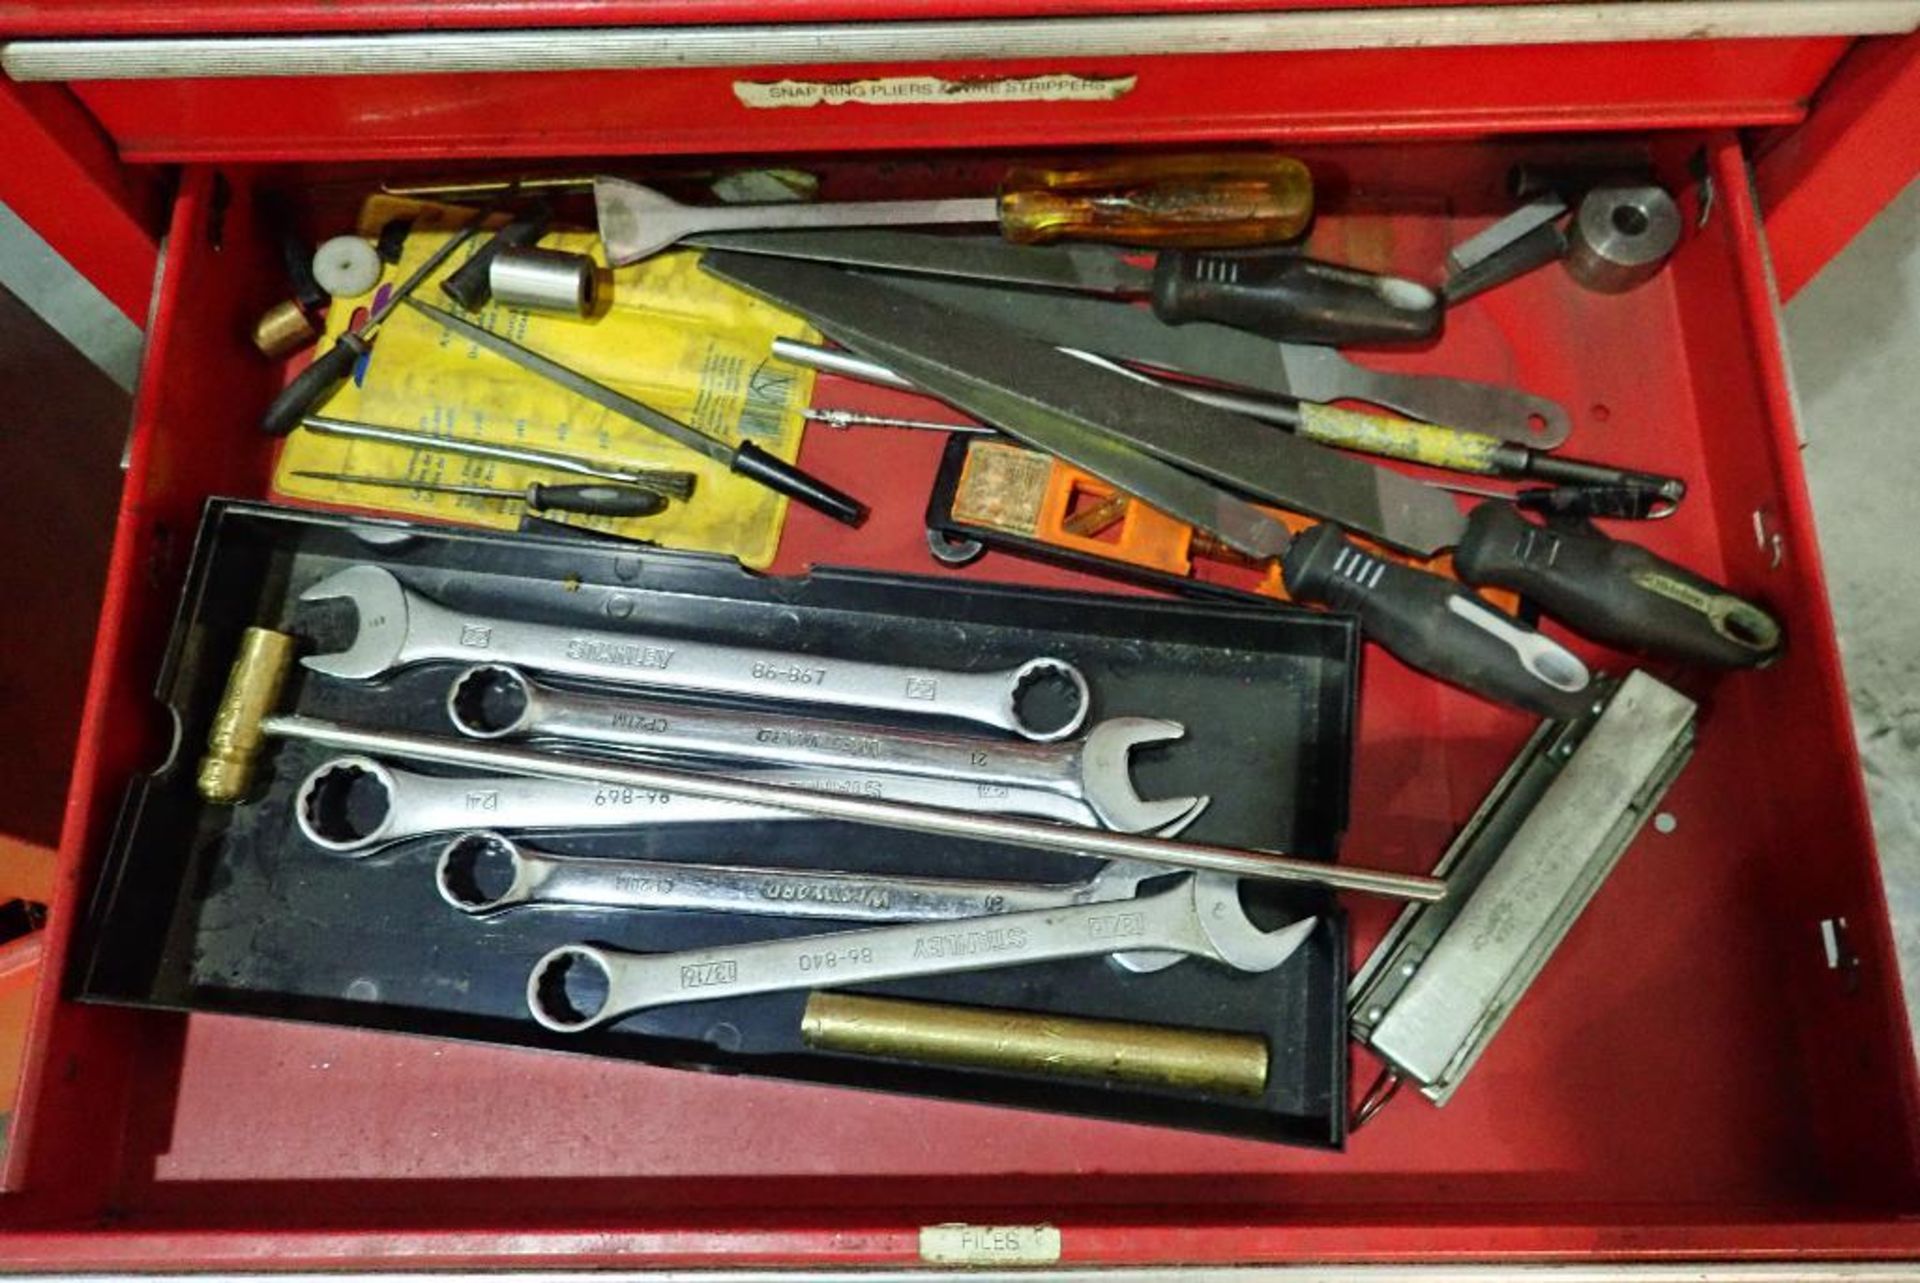 (2) tool chests with contents, wrenches, sockets, drill bits screw drivers, air tools, hammers, plie - Image 11 of 31